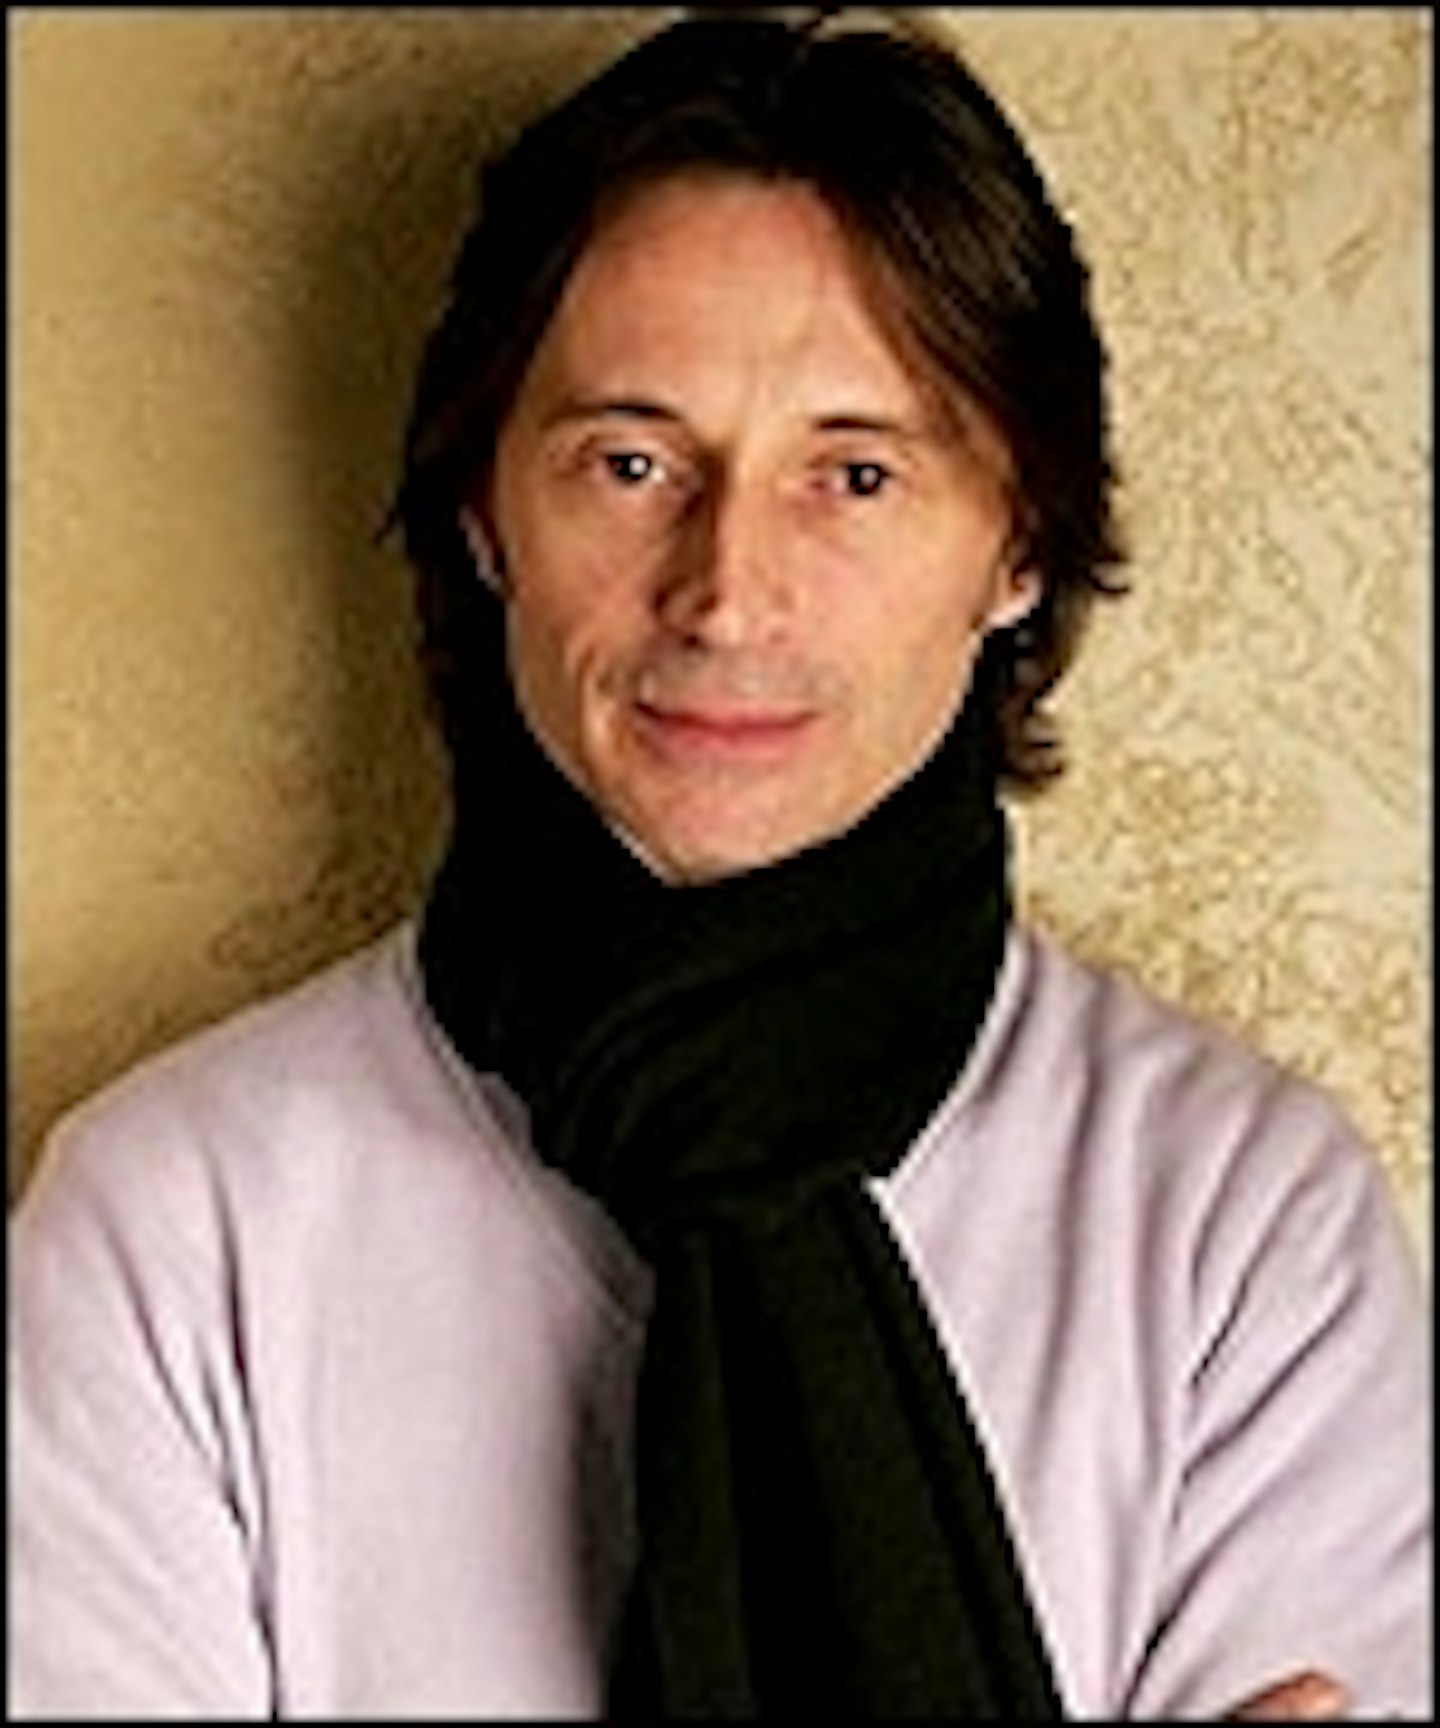 Robert Carlyle Joins Stargate Universe